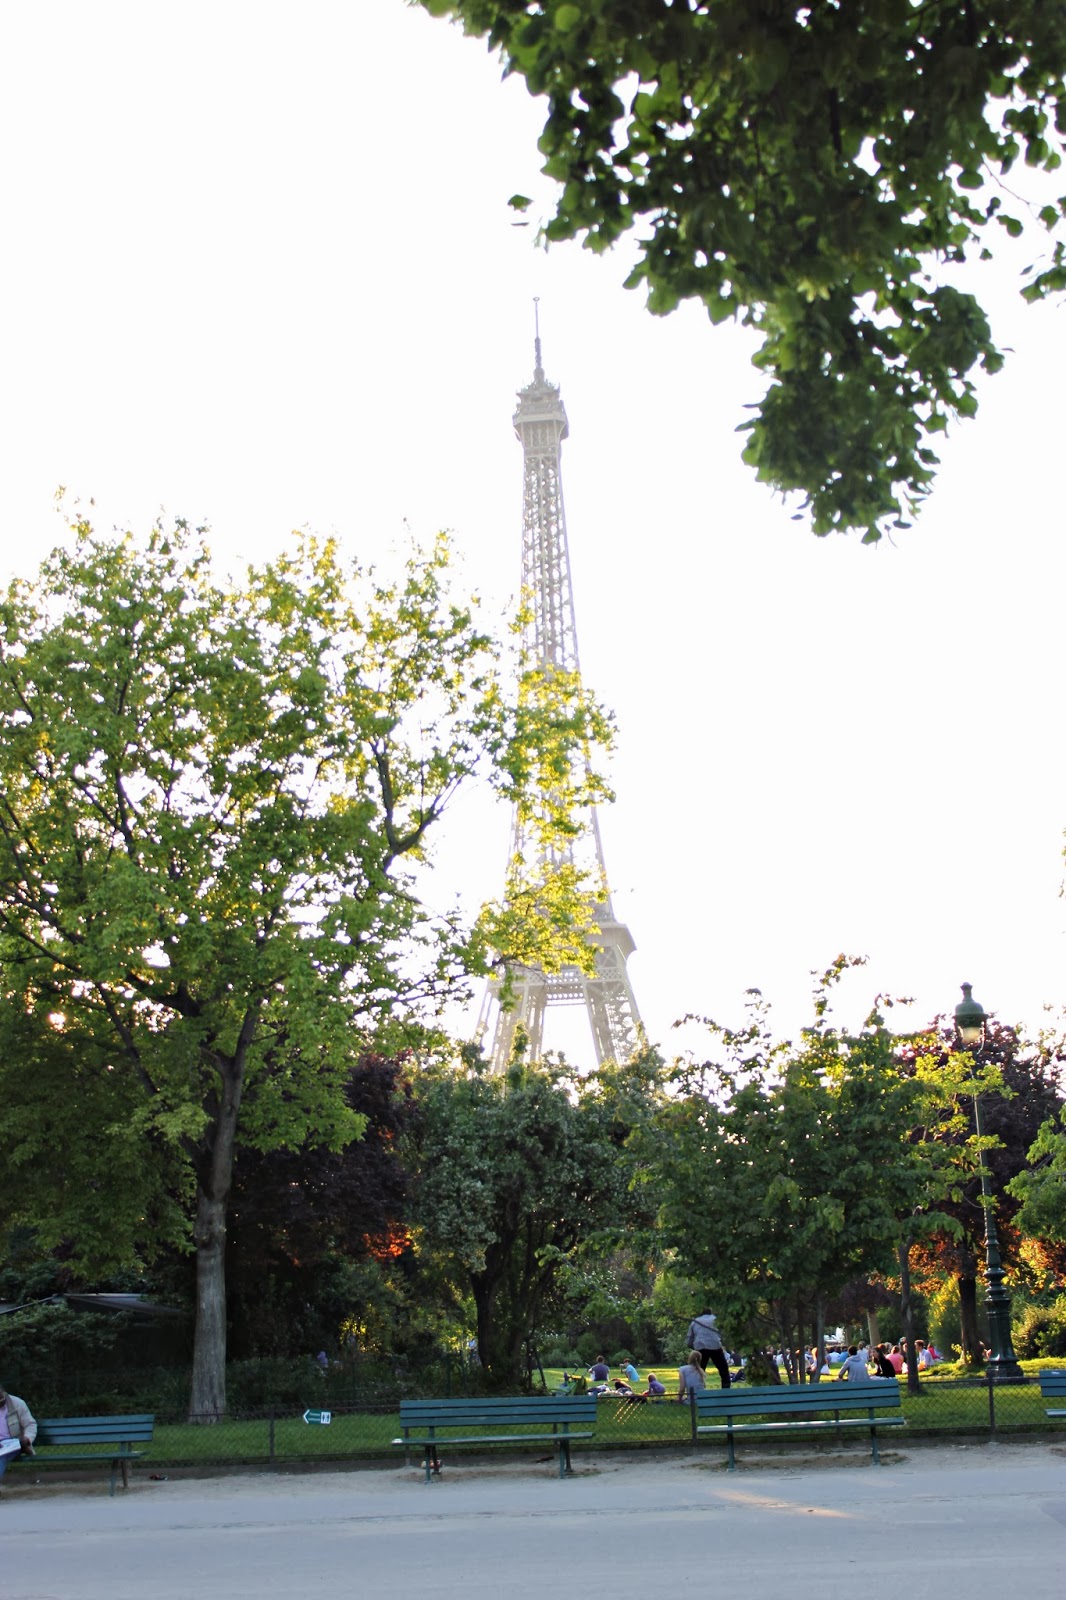 View of the Eiffel Tower from a park bench. 